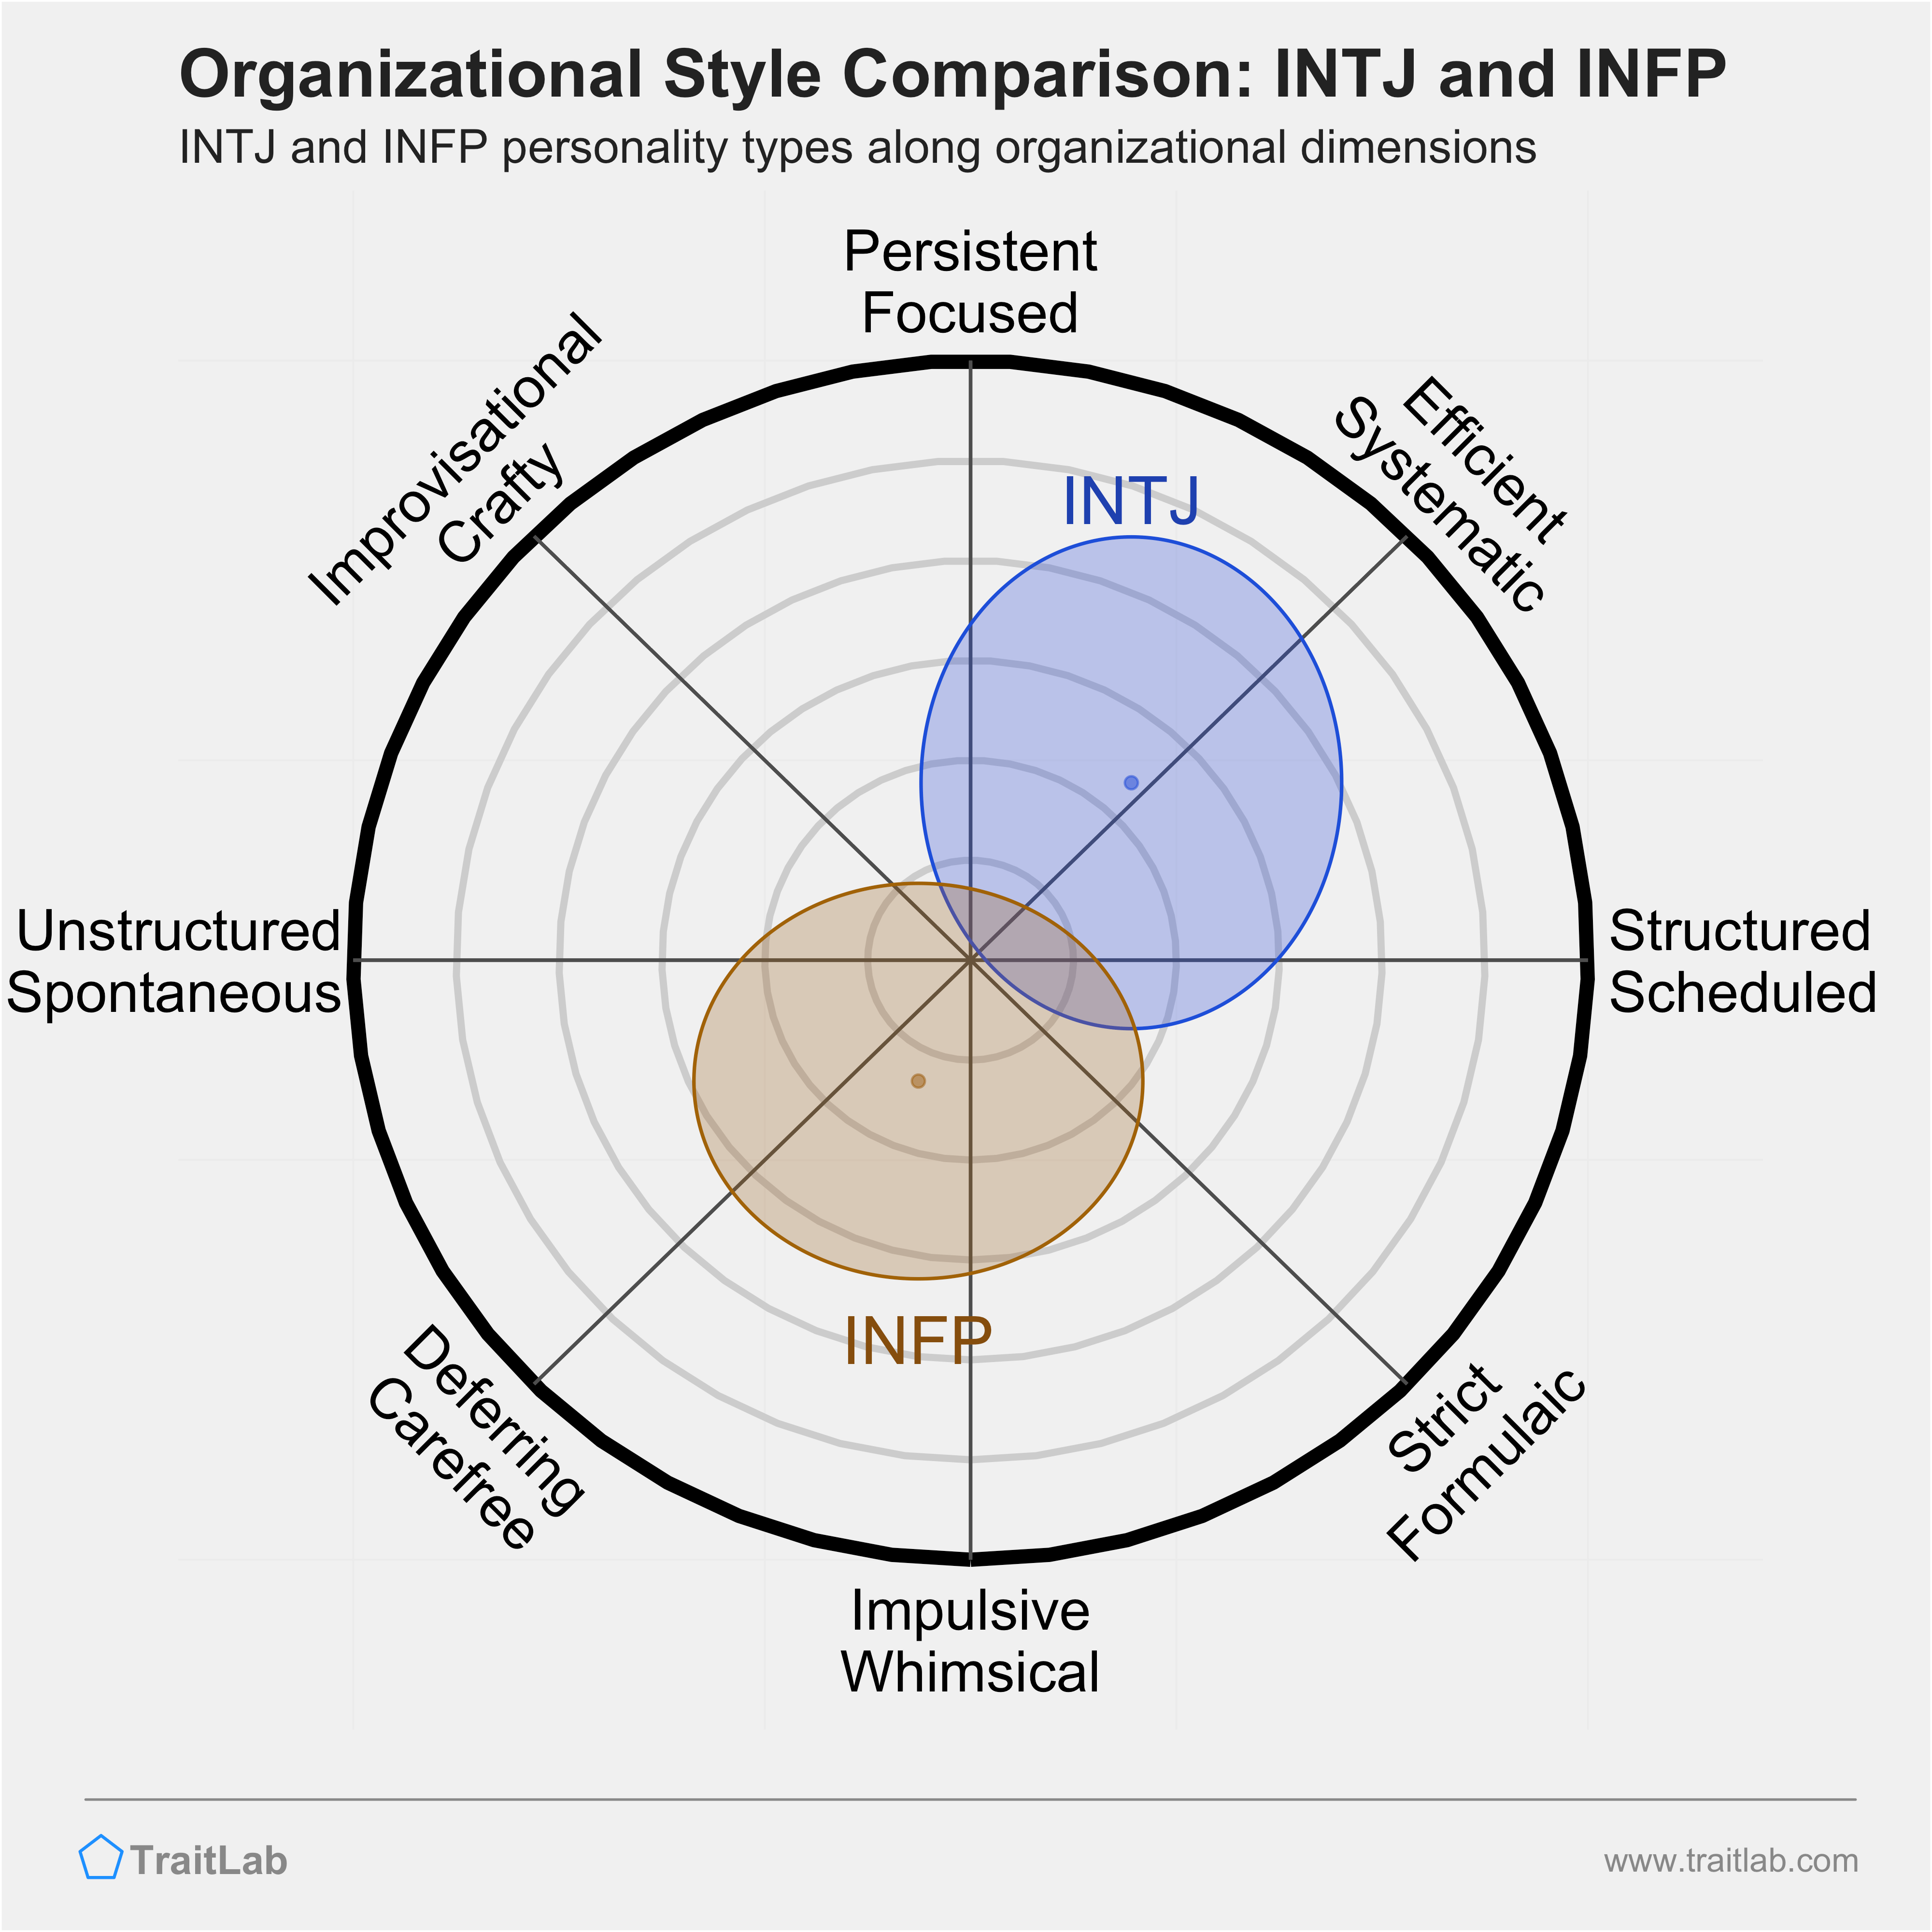 INTJ and INFP comparison across organizational dimensions